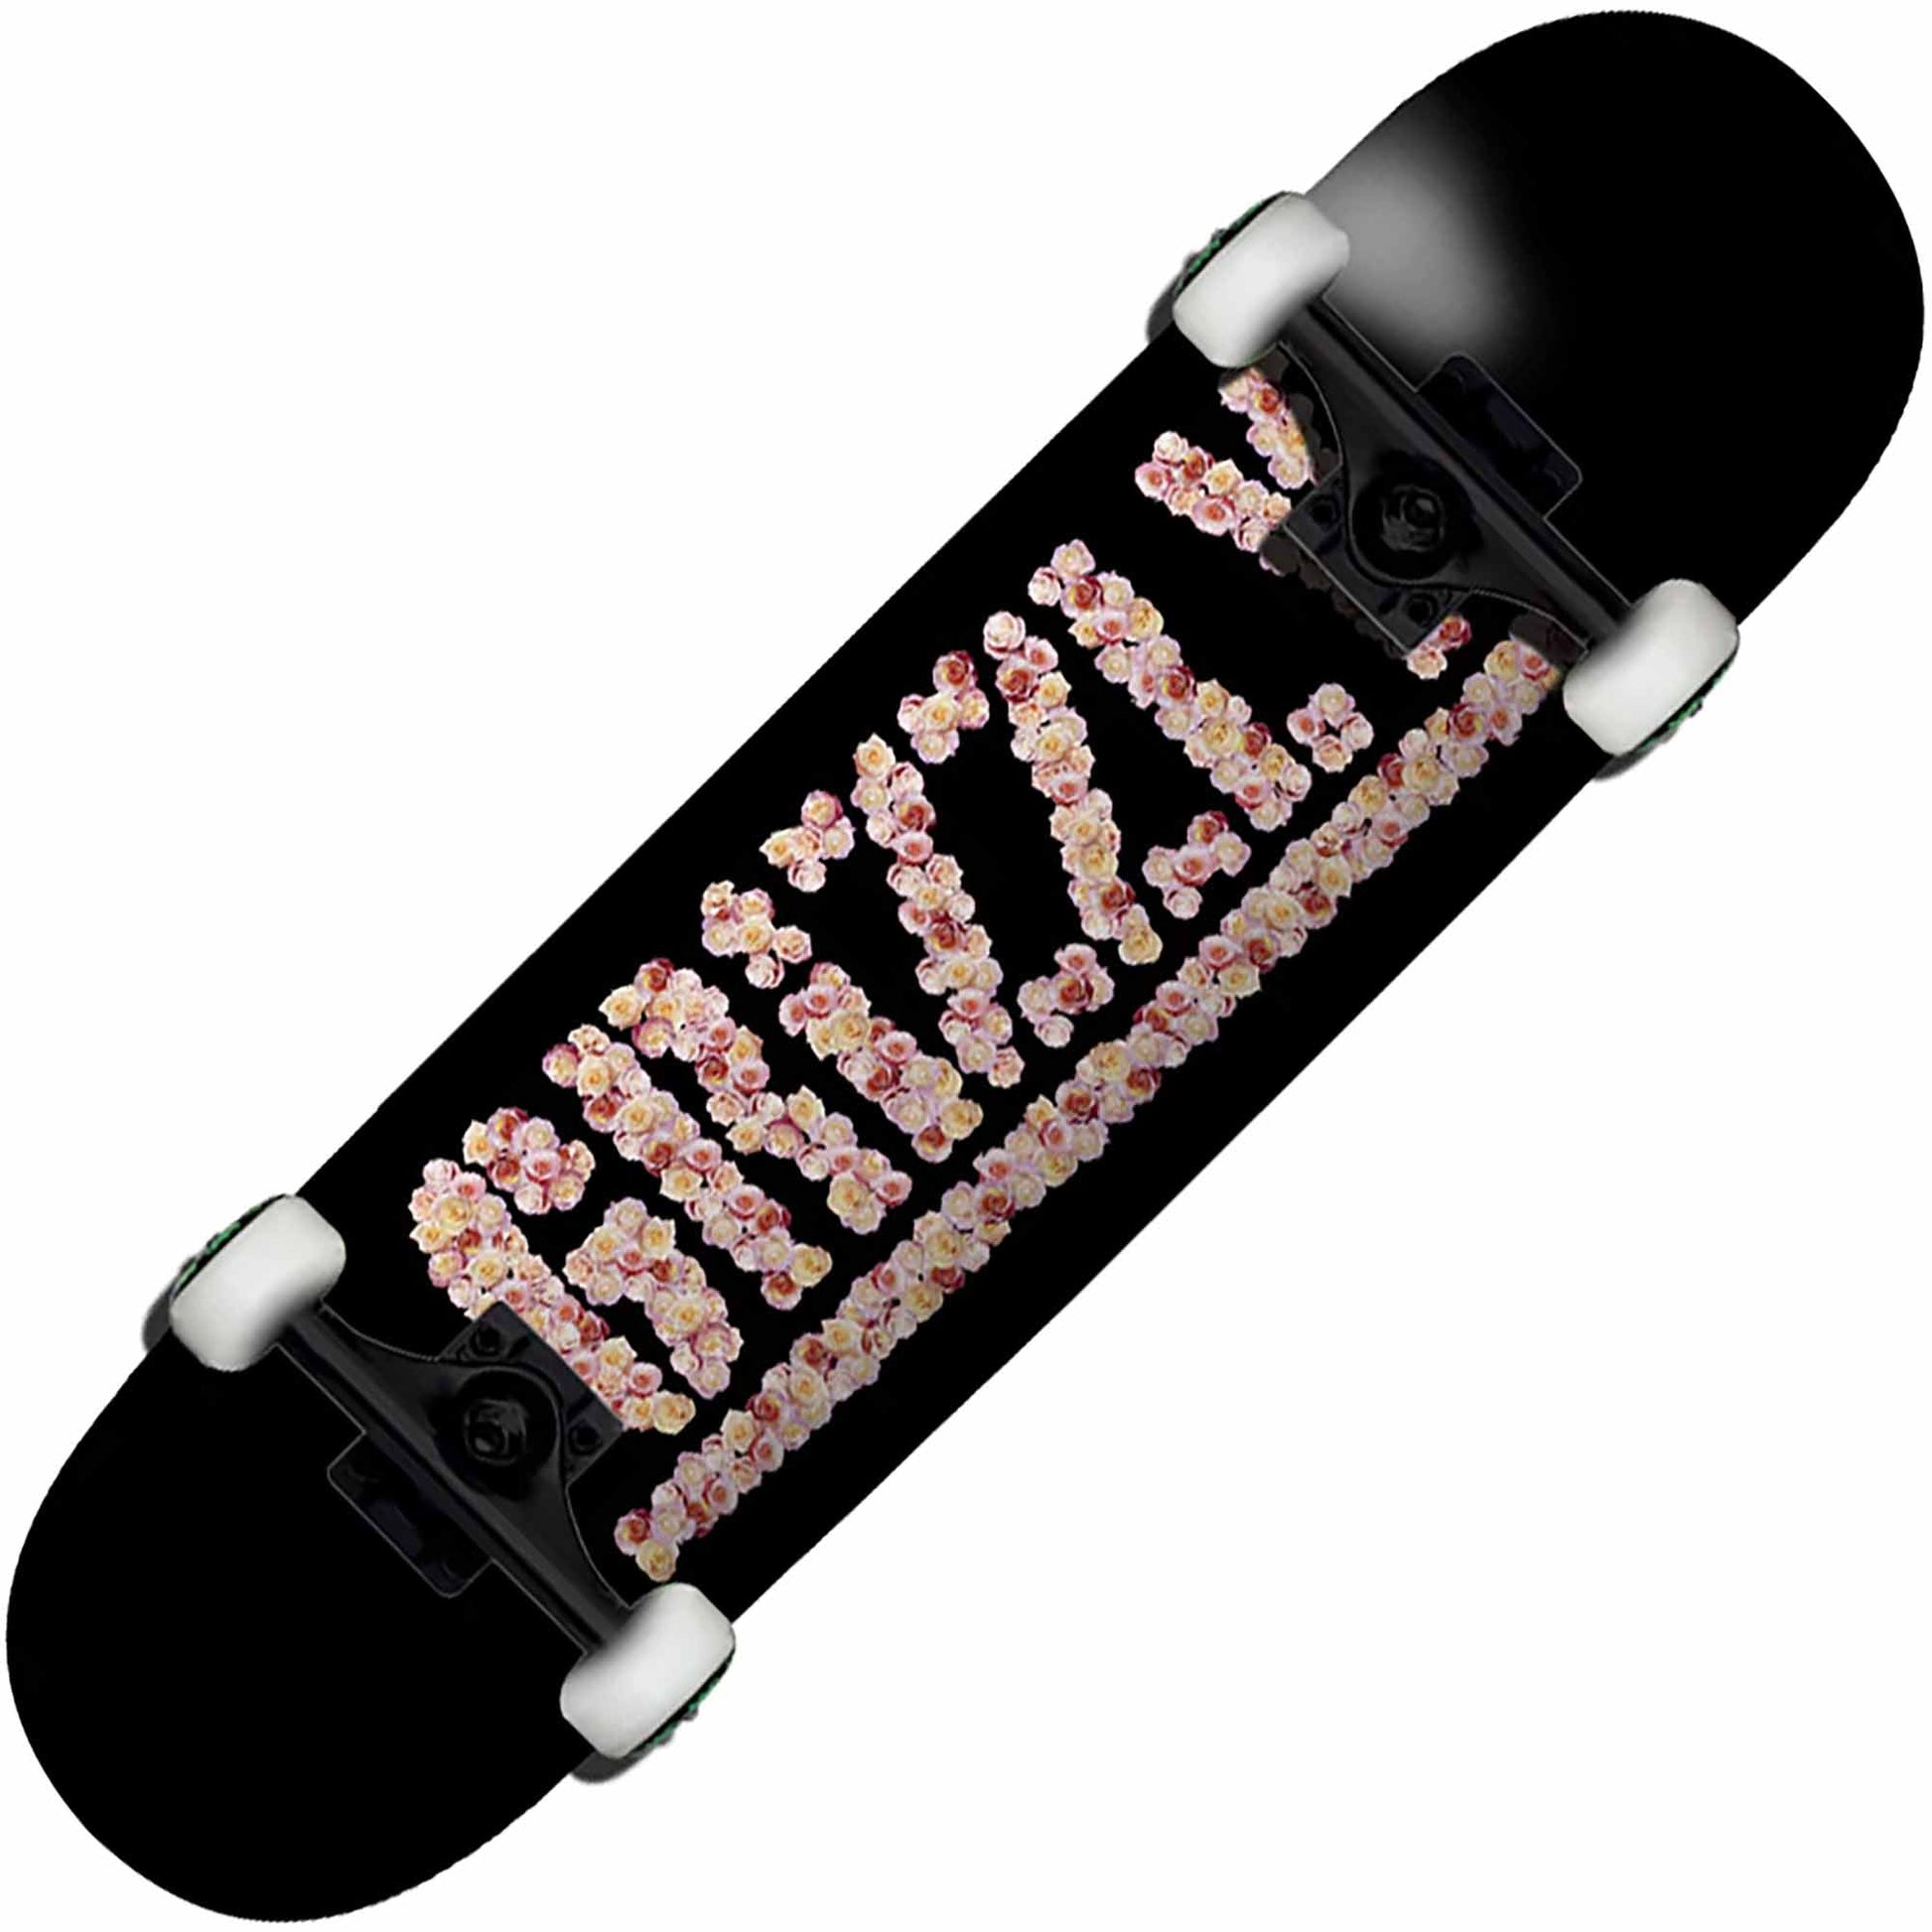 Grizzly Every Rose Complete (7.75") - Tiki Room Skateboards - 1